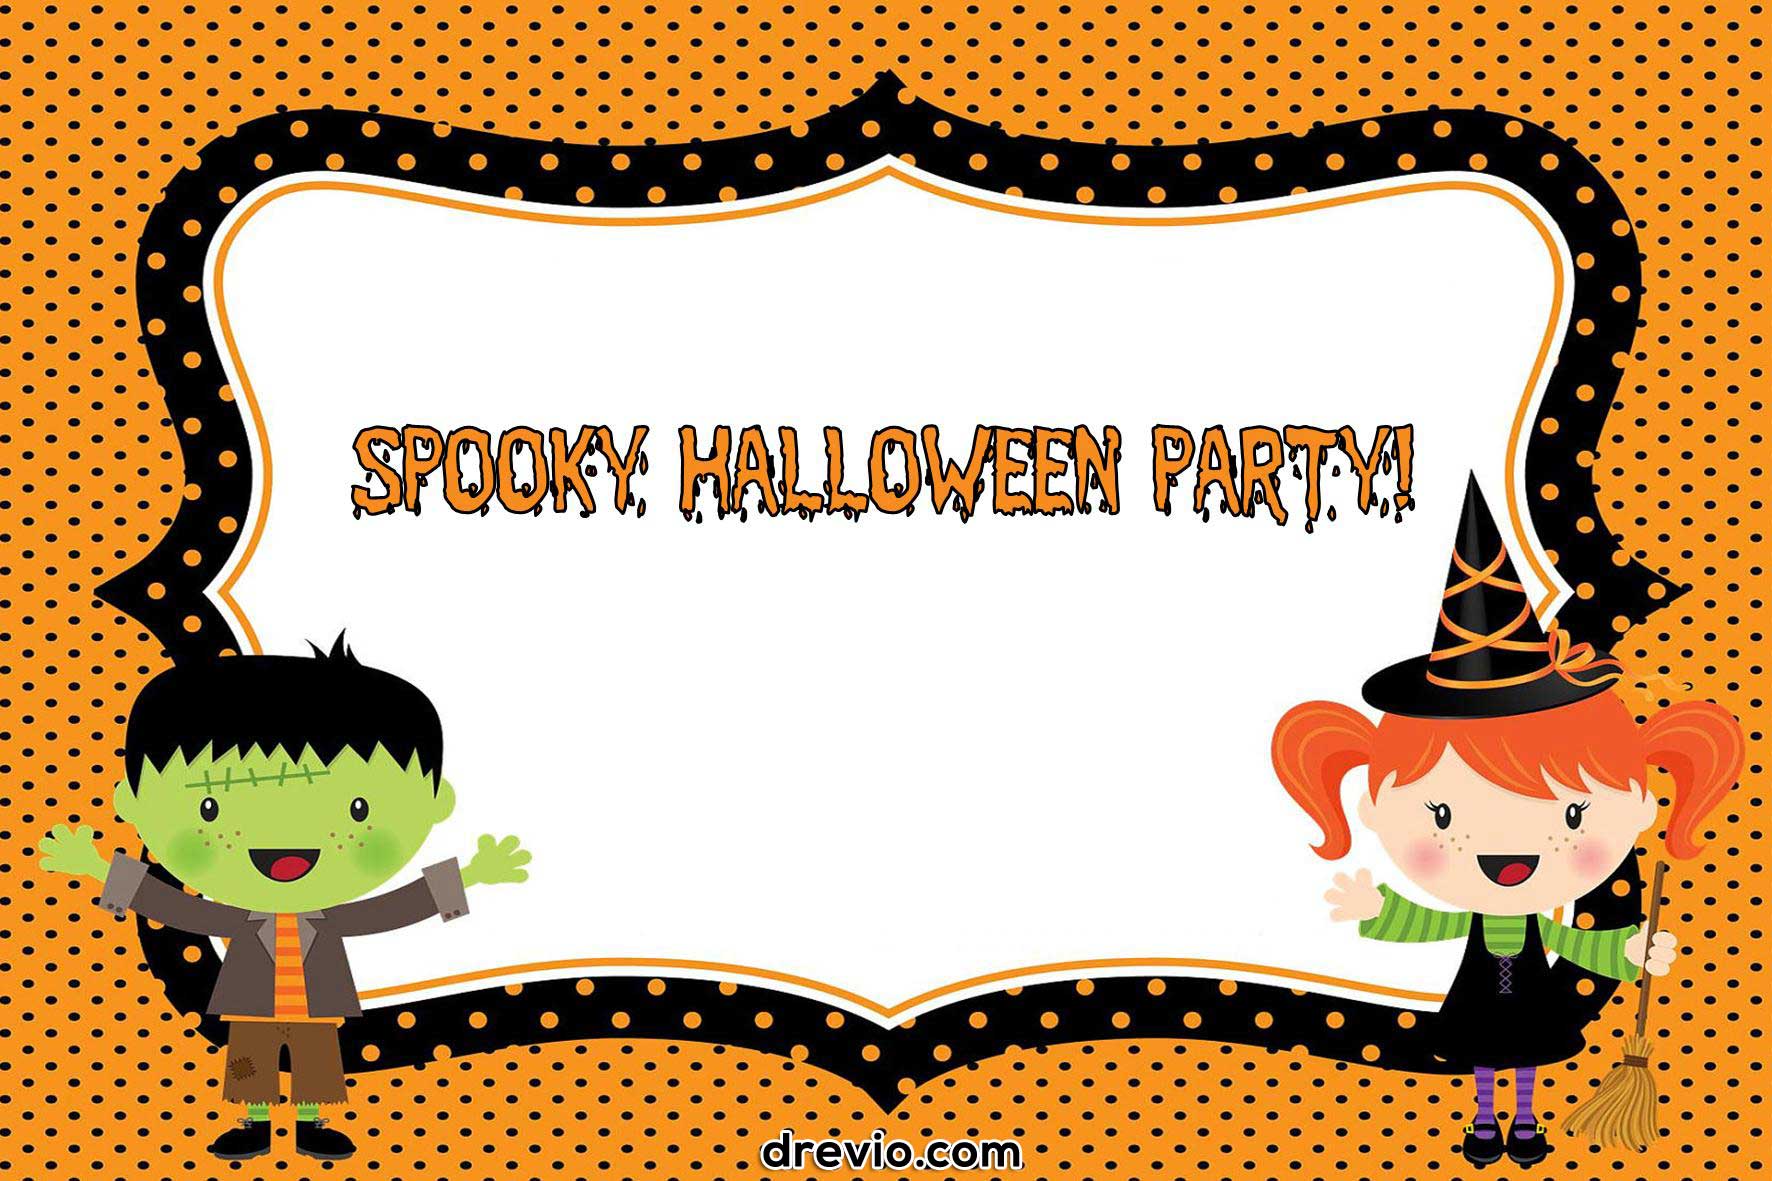 free-printable-party-invitations-printable-good-witch-halloween-party